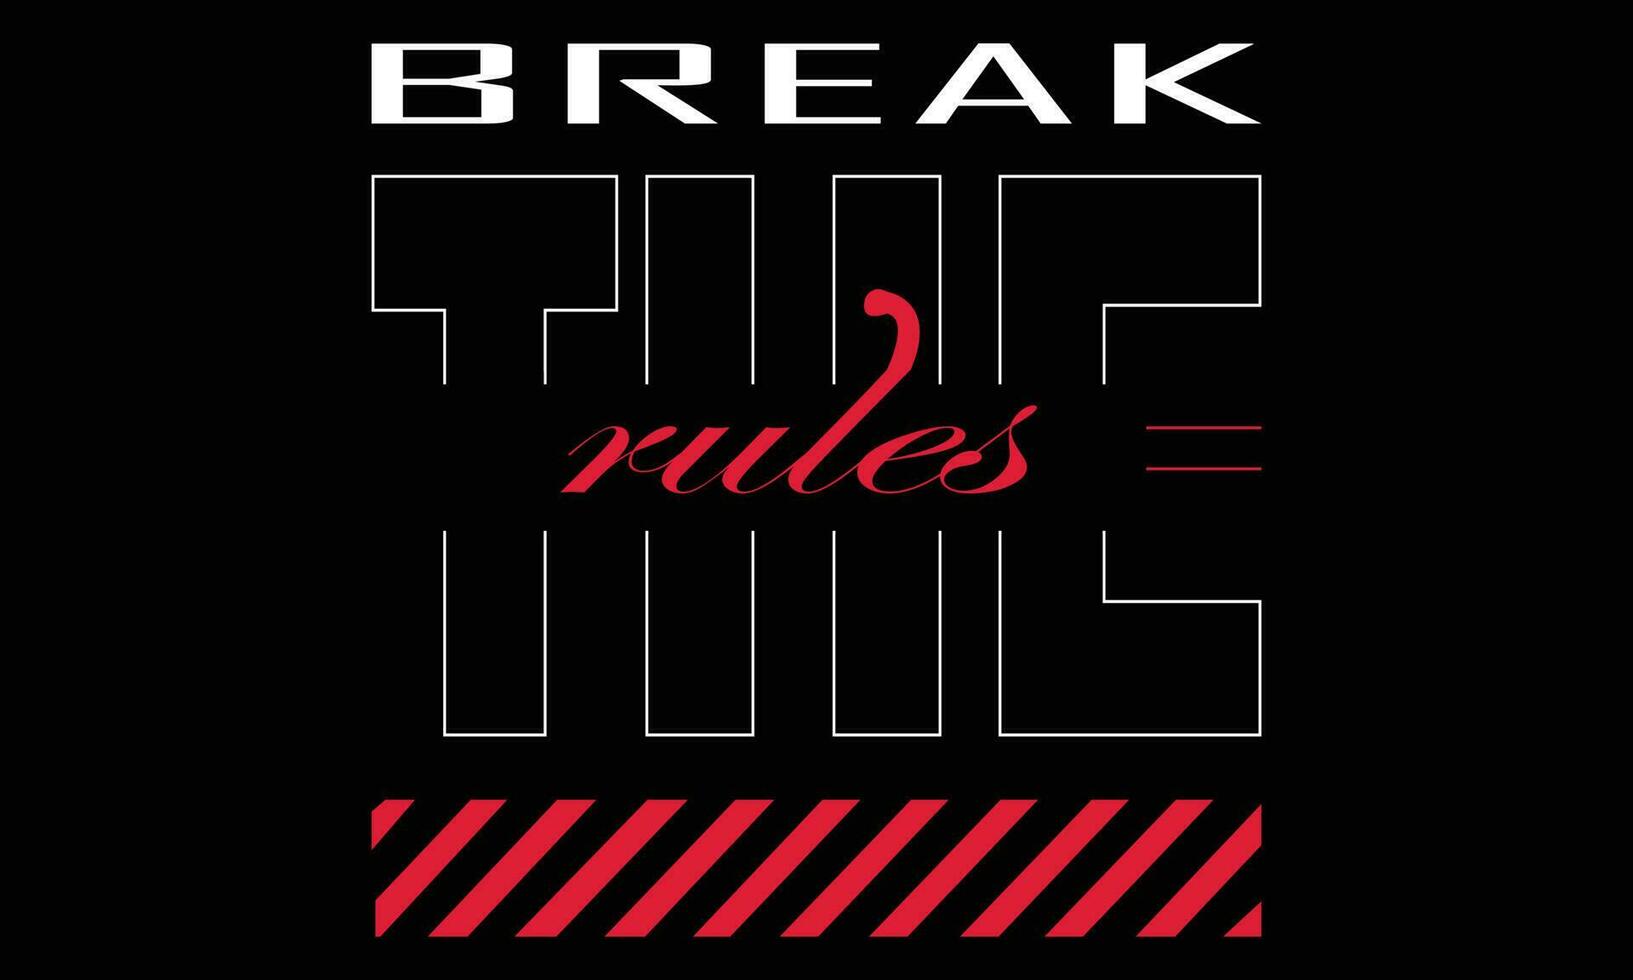 Break the rules inspirational quote. Urban street graffiti style with splash effects and drops on black background. Vector Illustration for printing, backgrounds, covers, posters, sticker, t-shirts